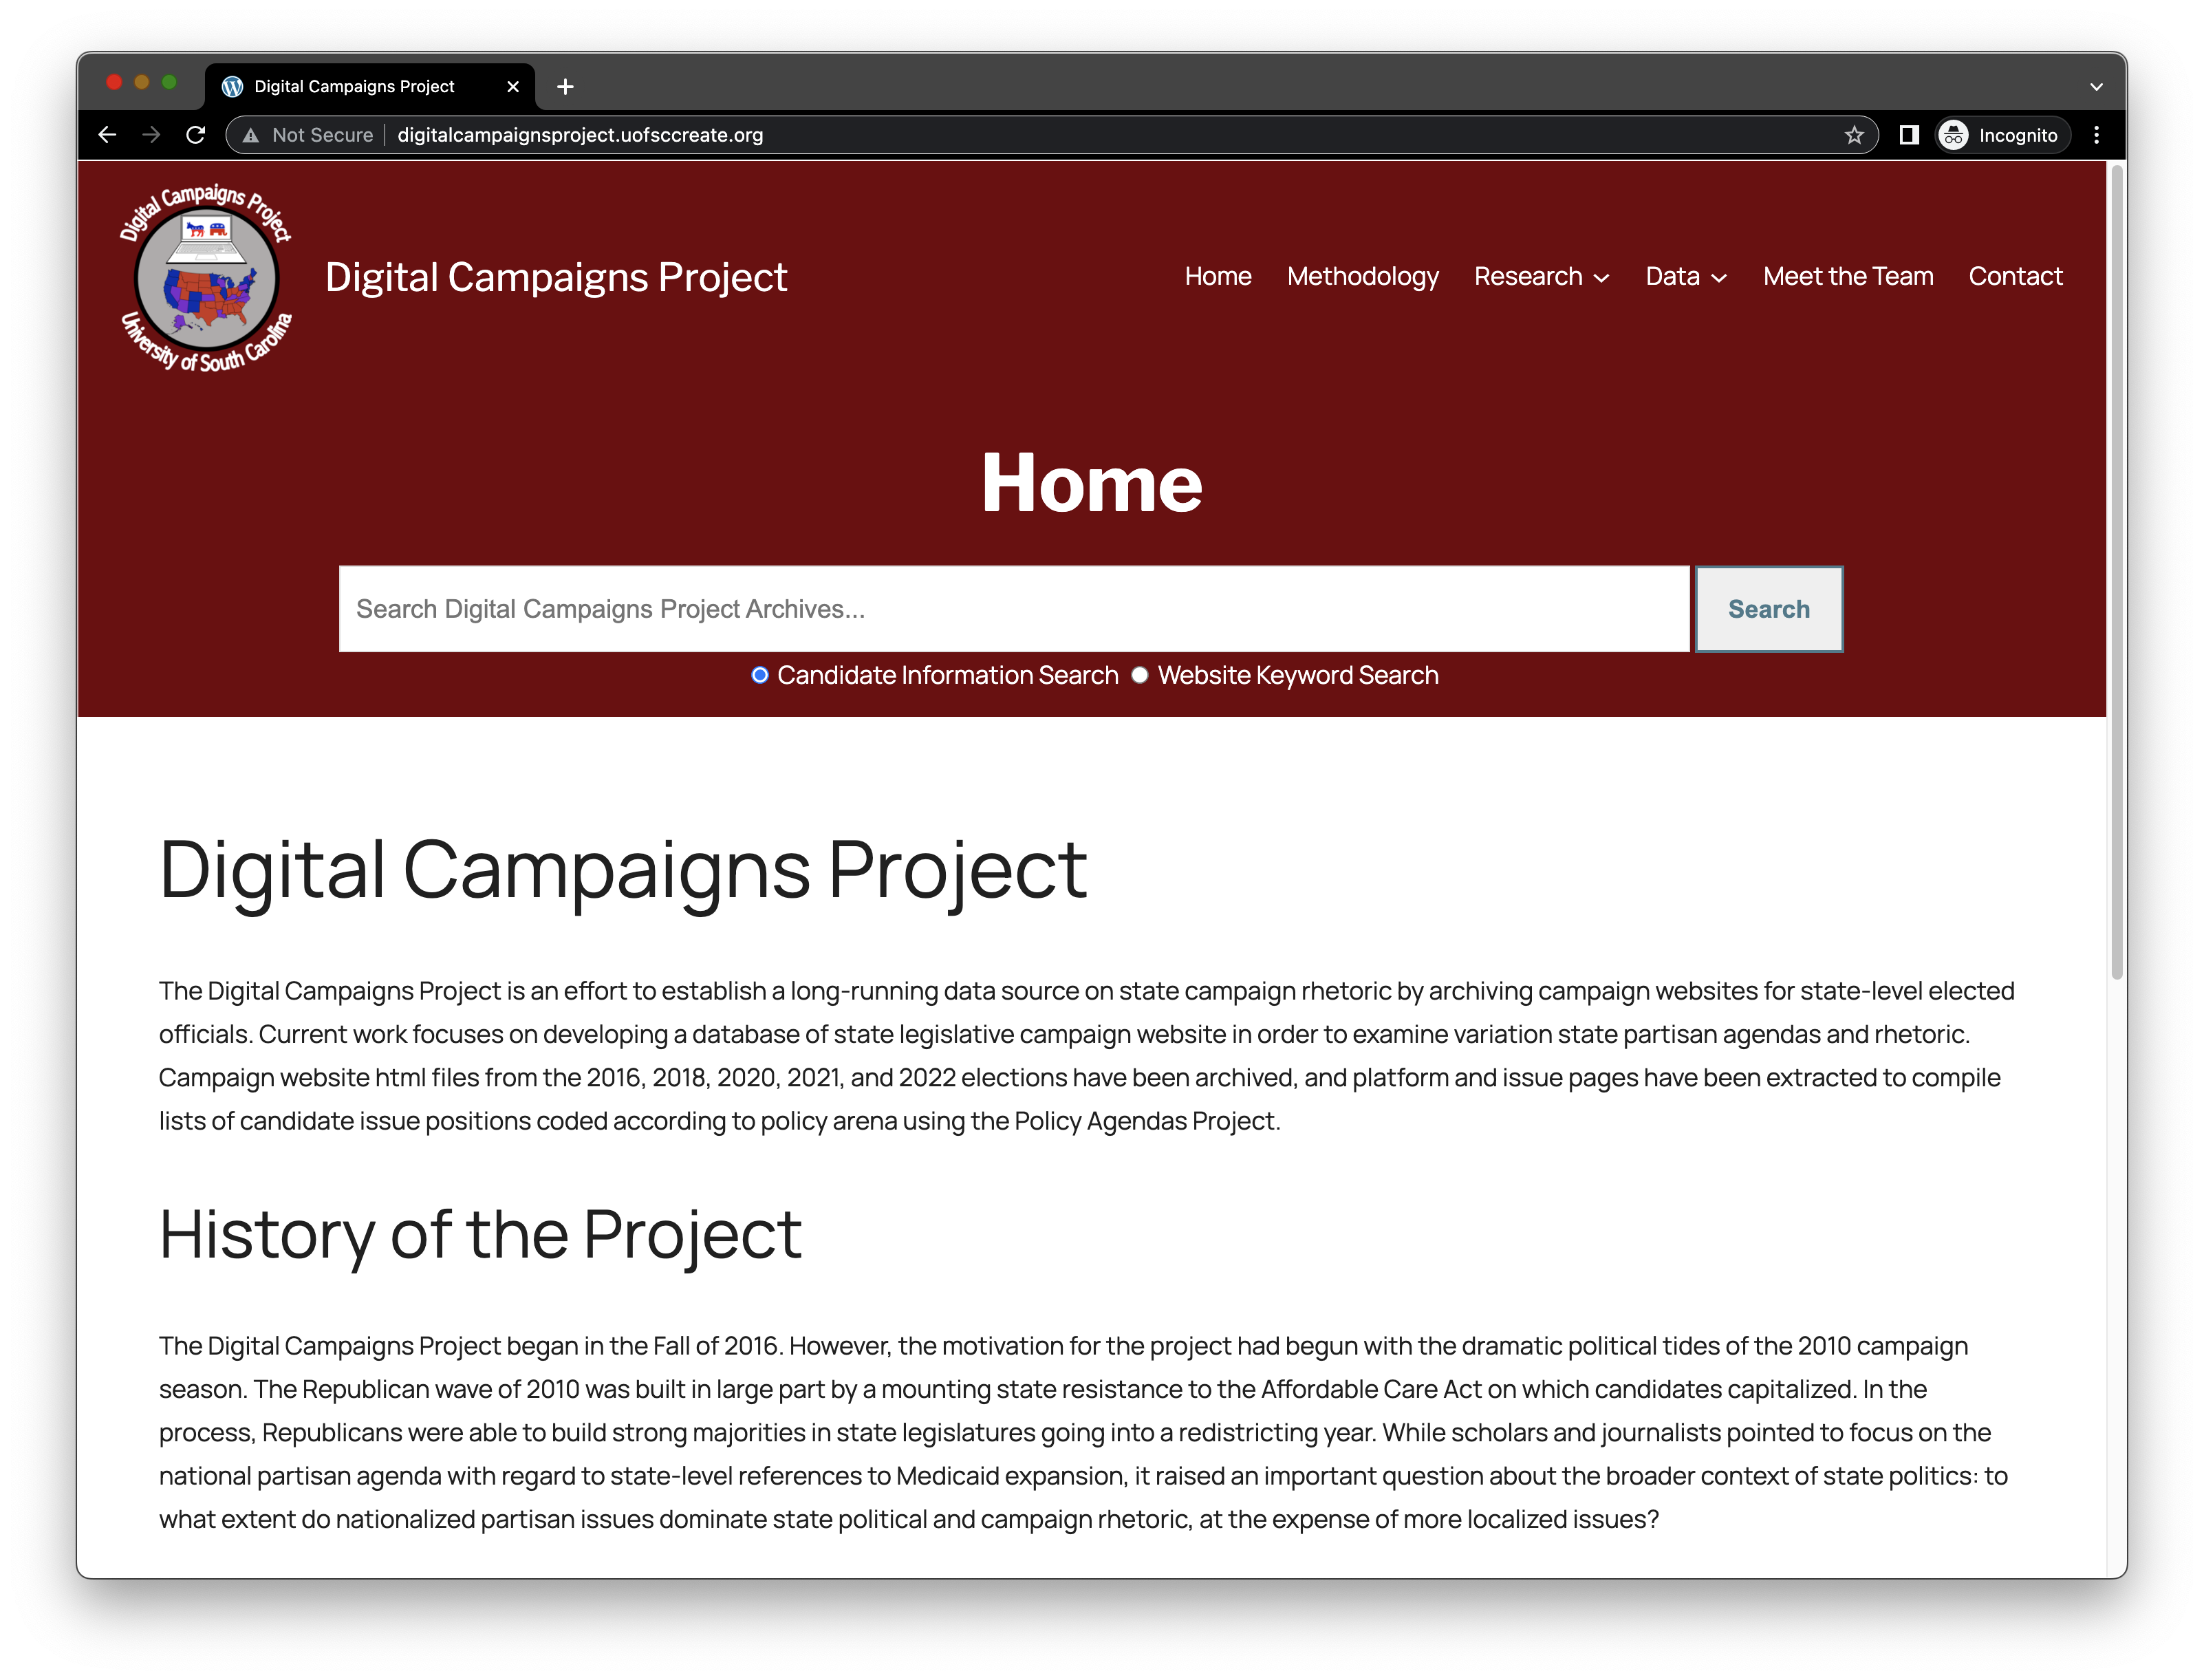 Digital Campaigns Project homepage